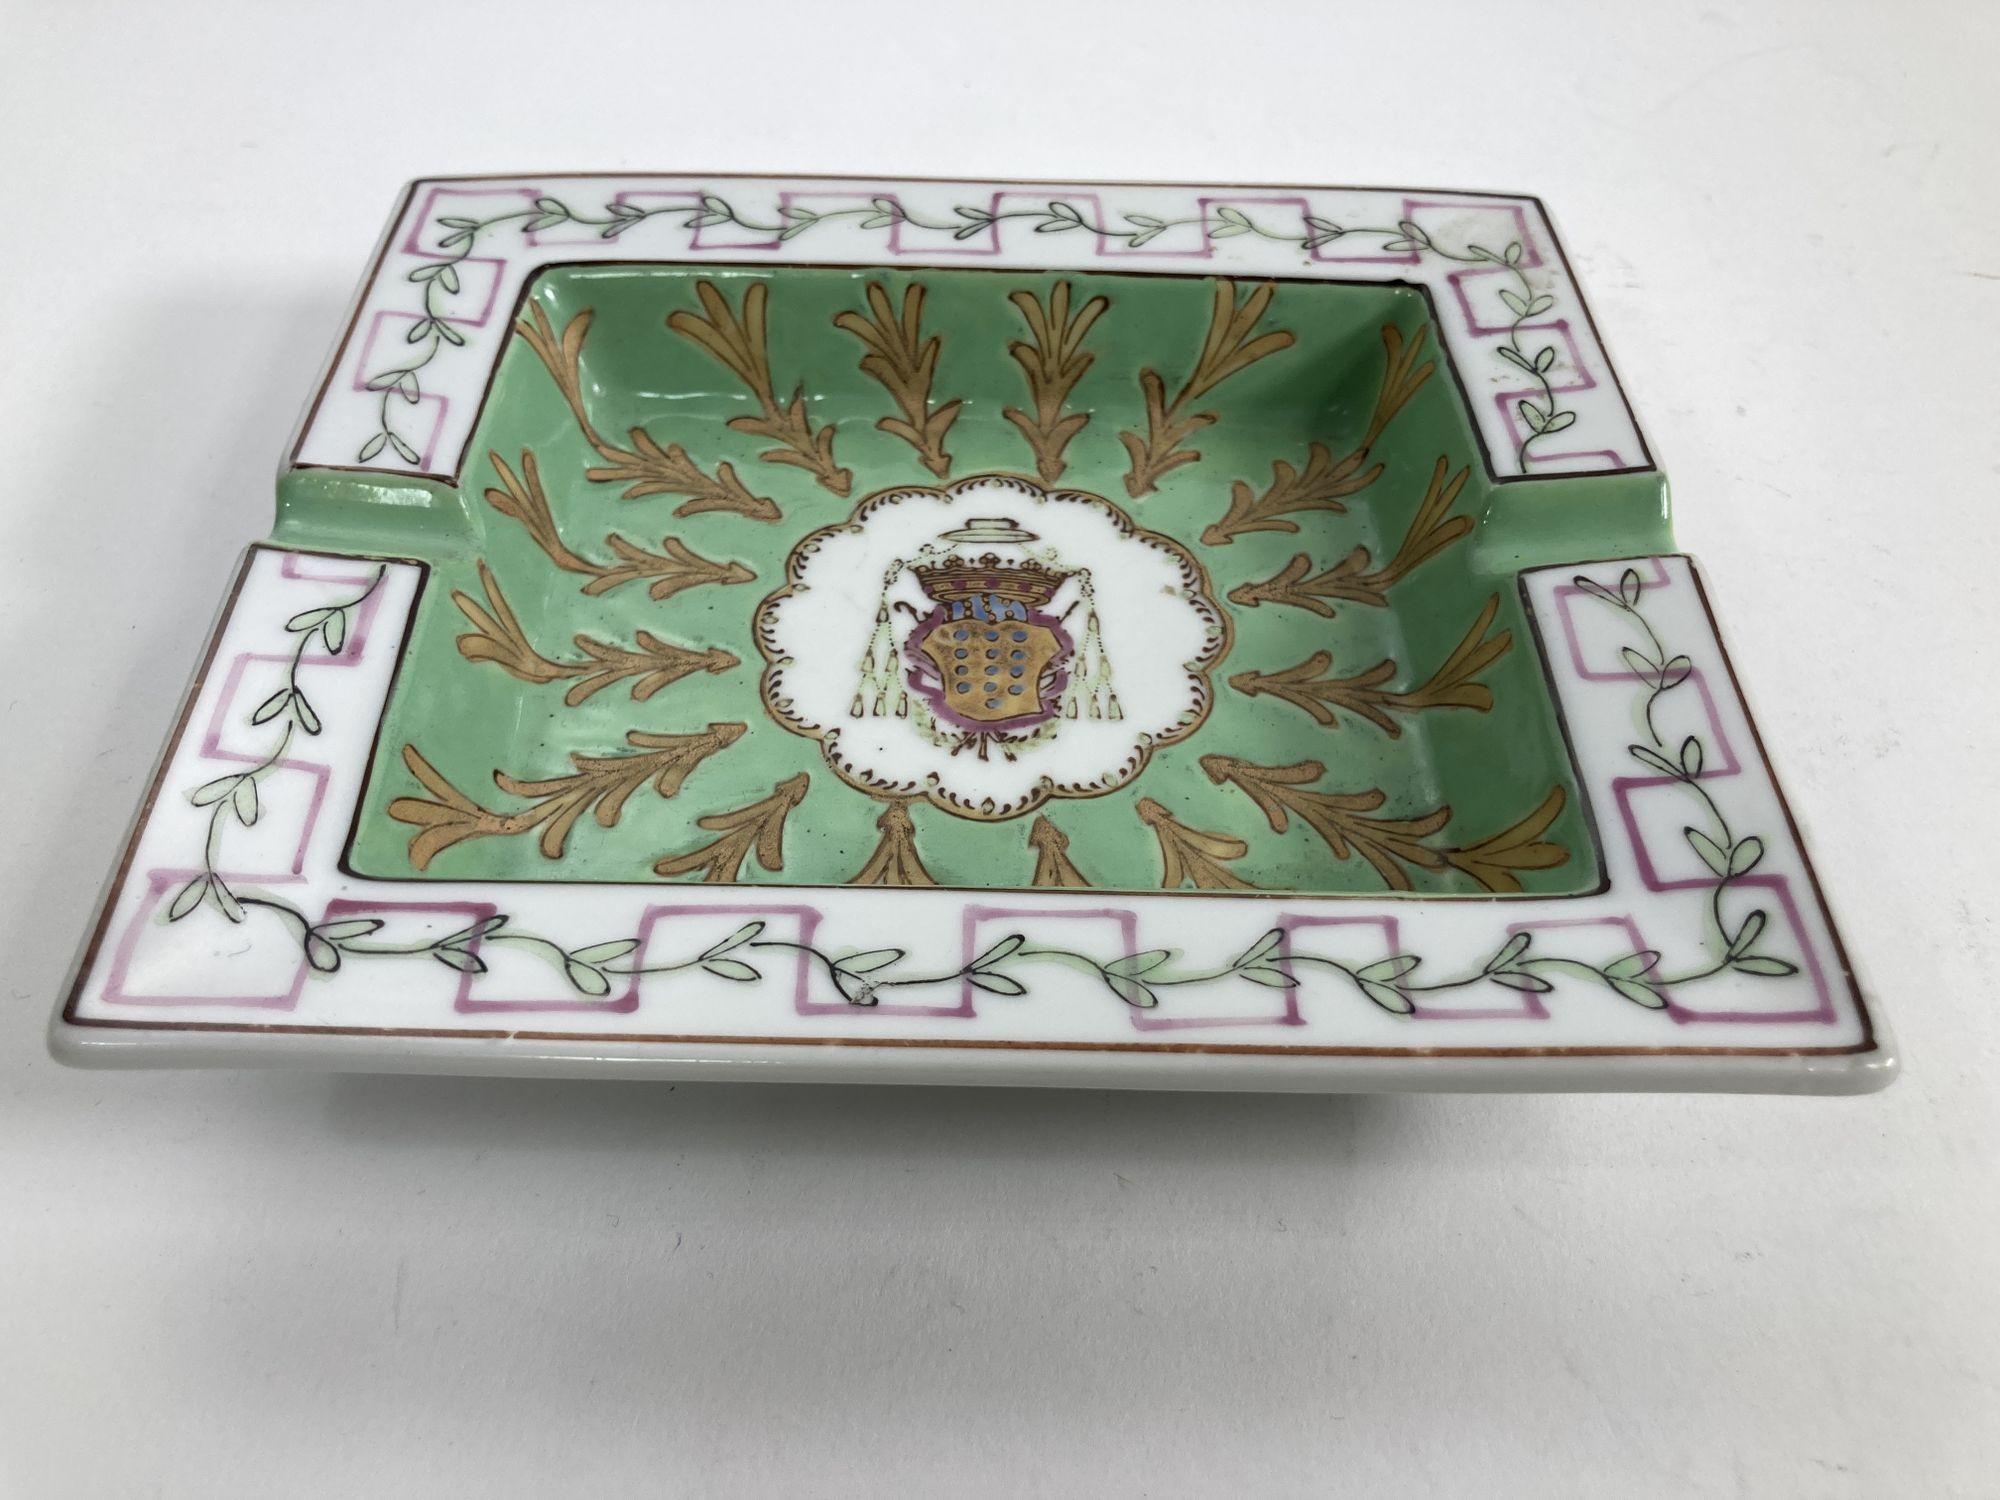 Vintage Porcelain ashtray white and green with coat of arms.
Hand-painted, 1980s
White porcelain with green design in relief..
Very good condition.
Measures: 7.5” W x 6.5” x 1.5